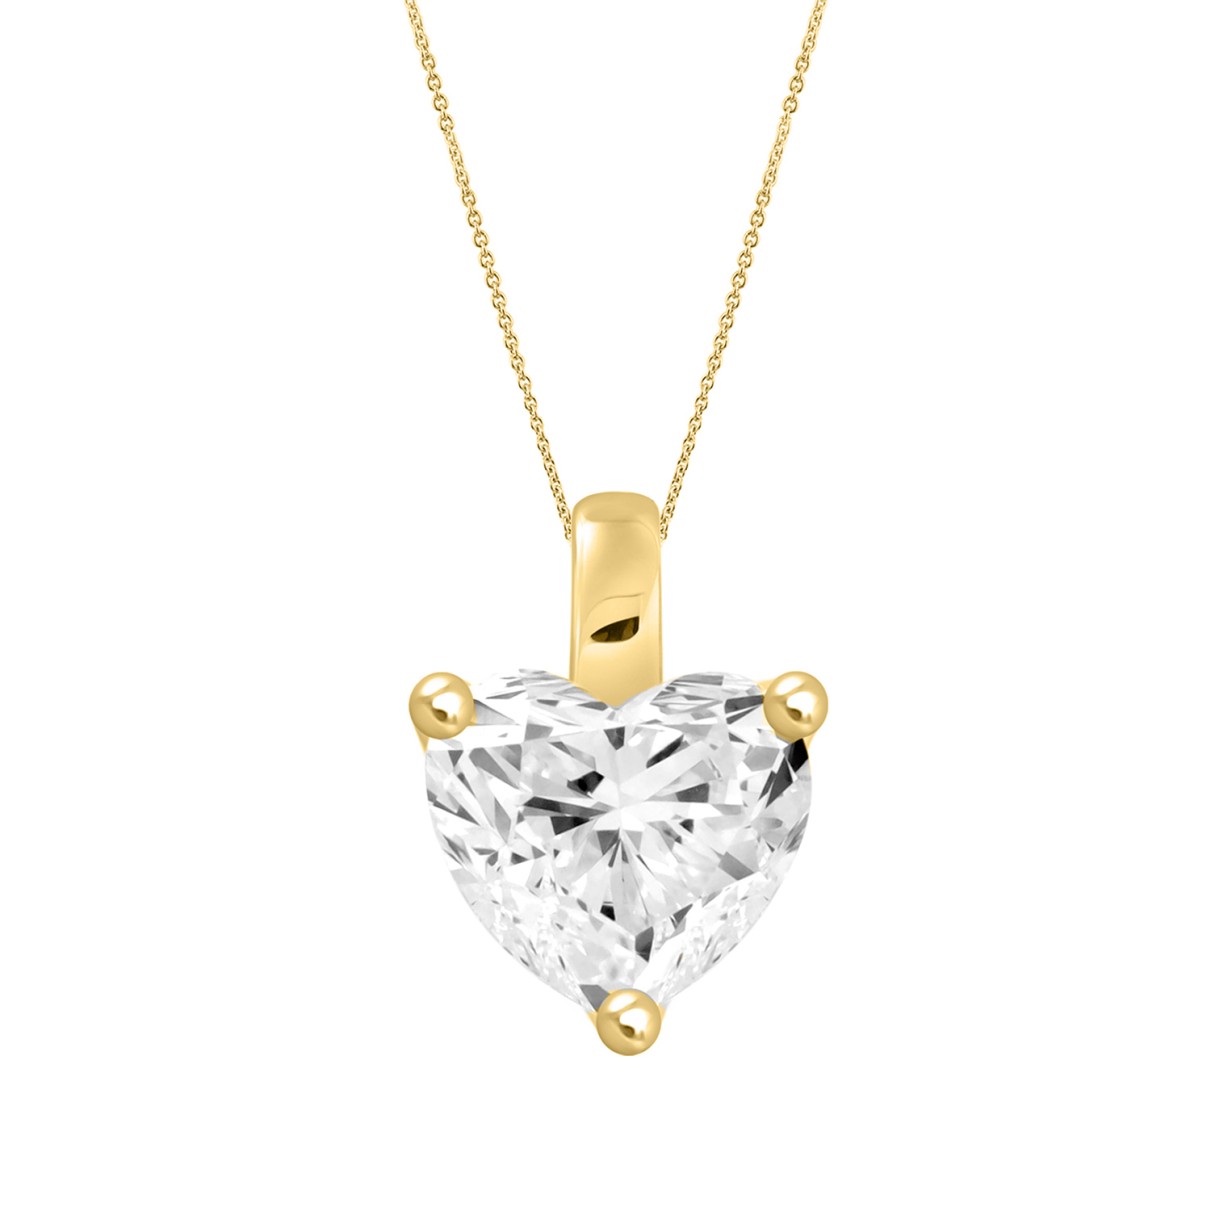 LADIES SOLITAIRE PENDANT WITH CHAIN 3CT HEART DIAMOND 14K YELLOW GOLD 